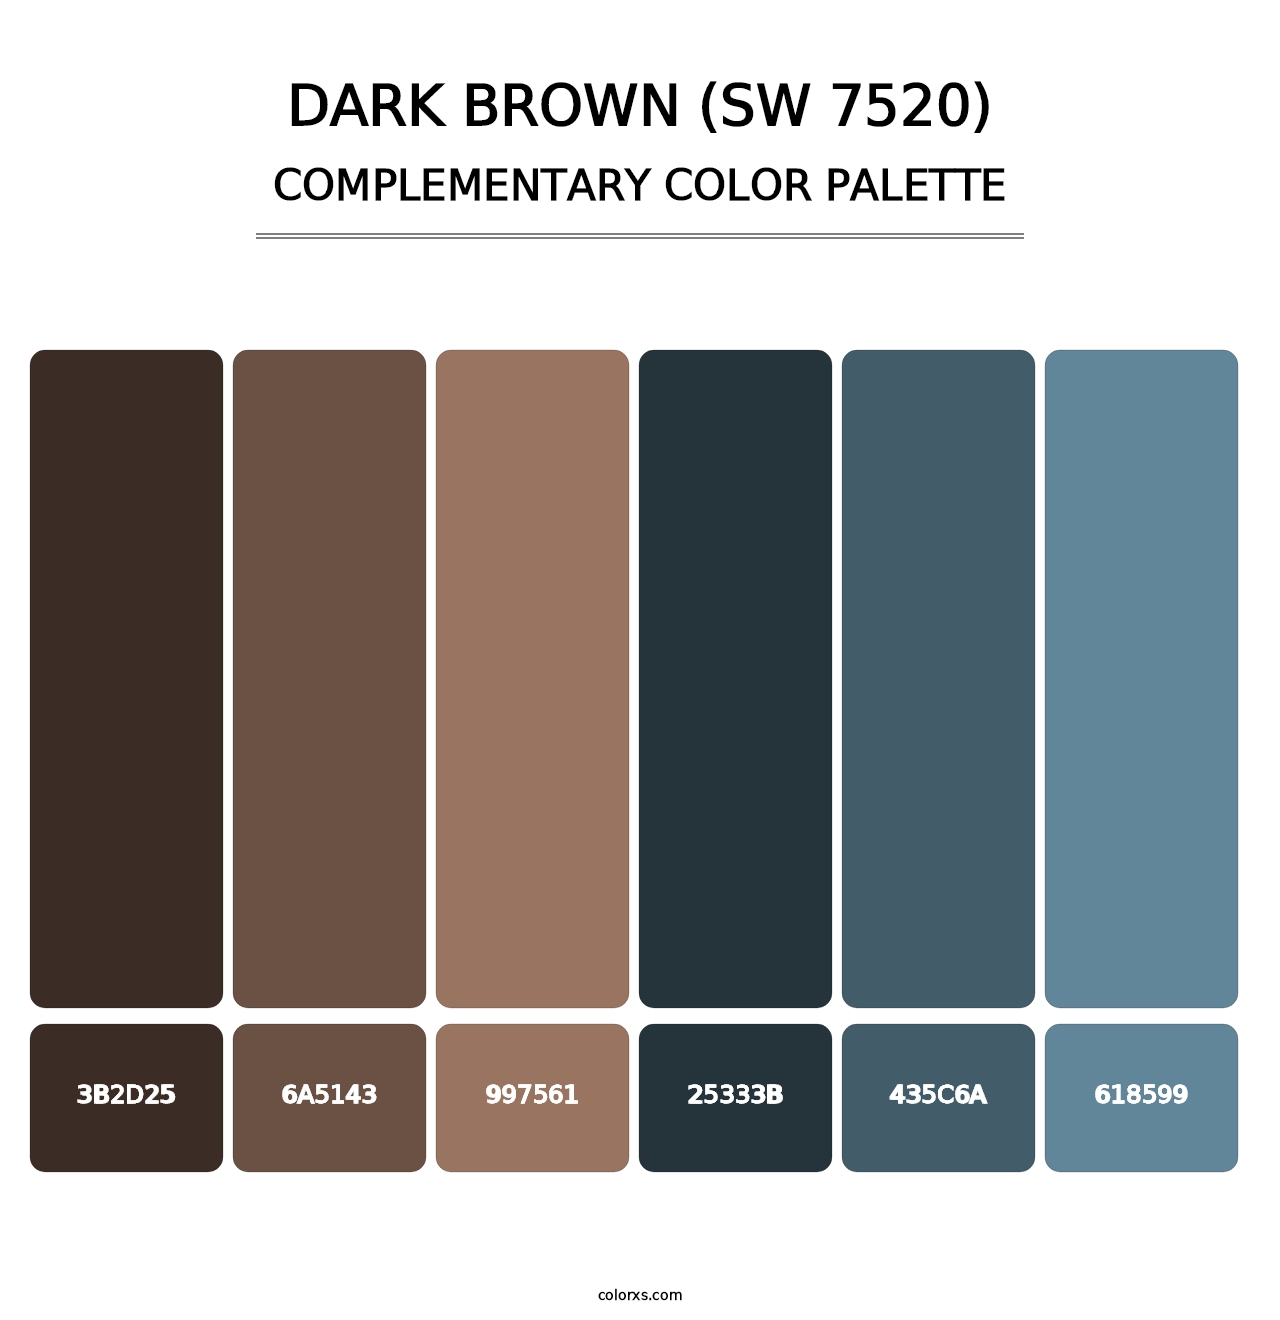 Dark Brown (SW 7520) - Complementary Color Palette